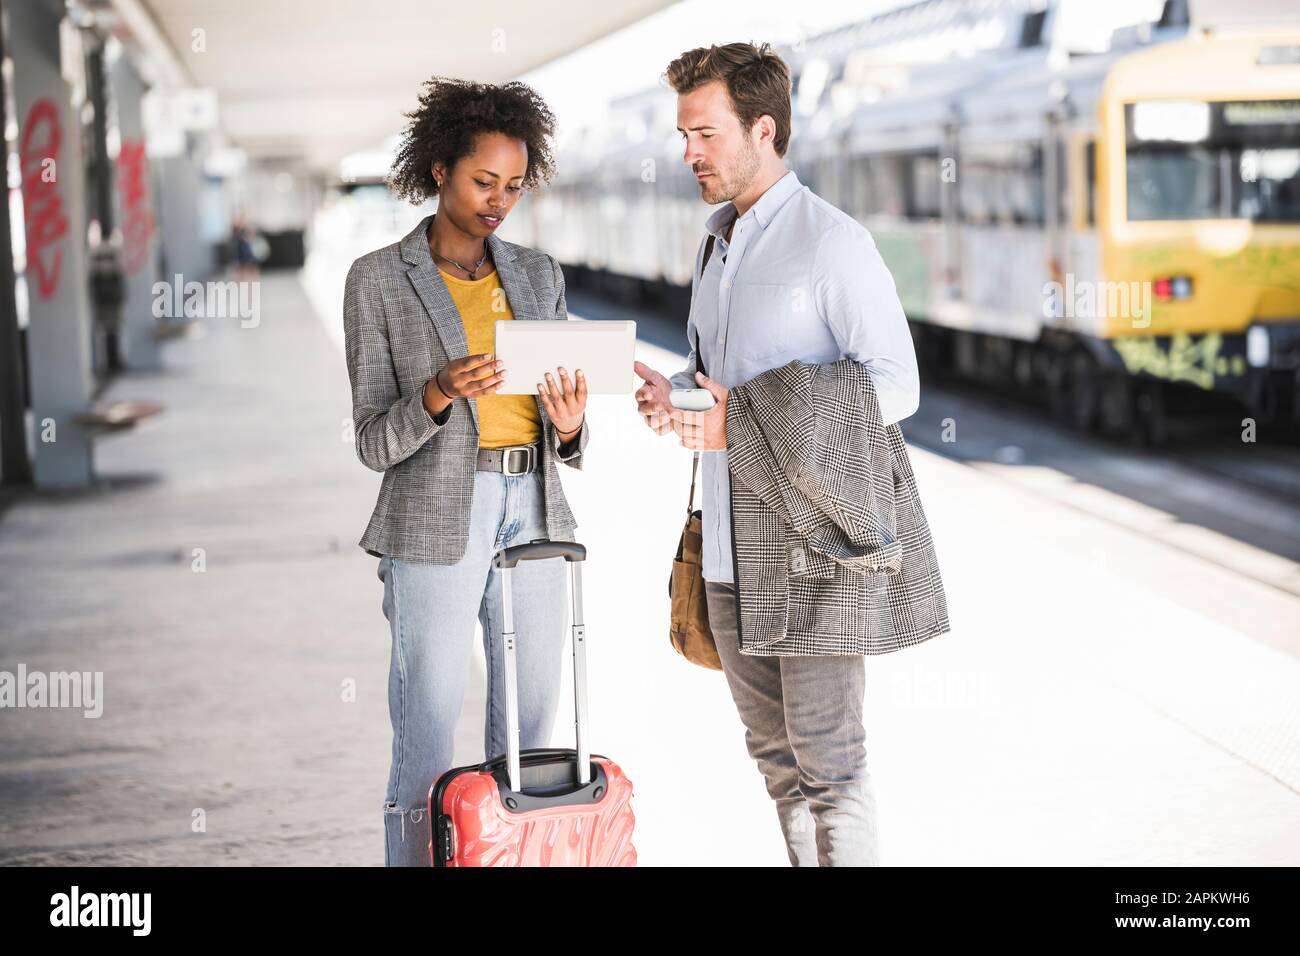 Young businessman and businesswoman using tablet together at the train station Stock Photo